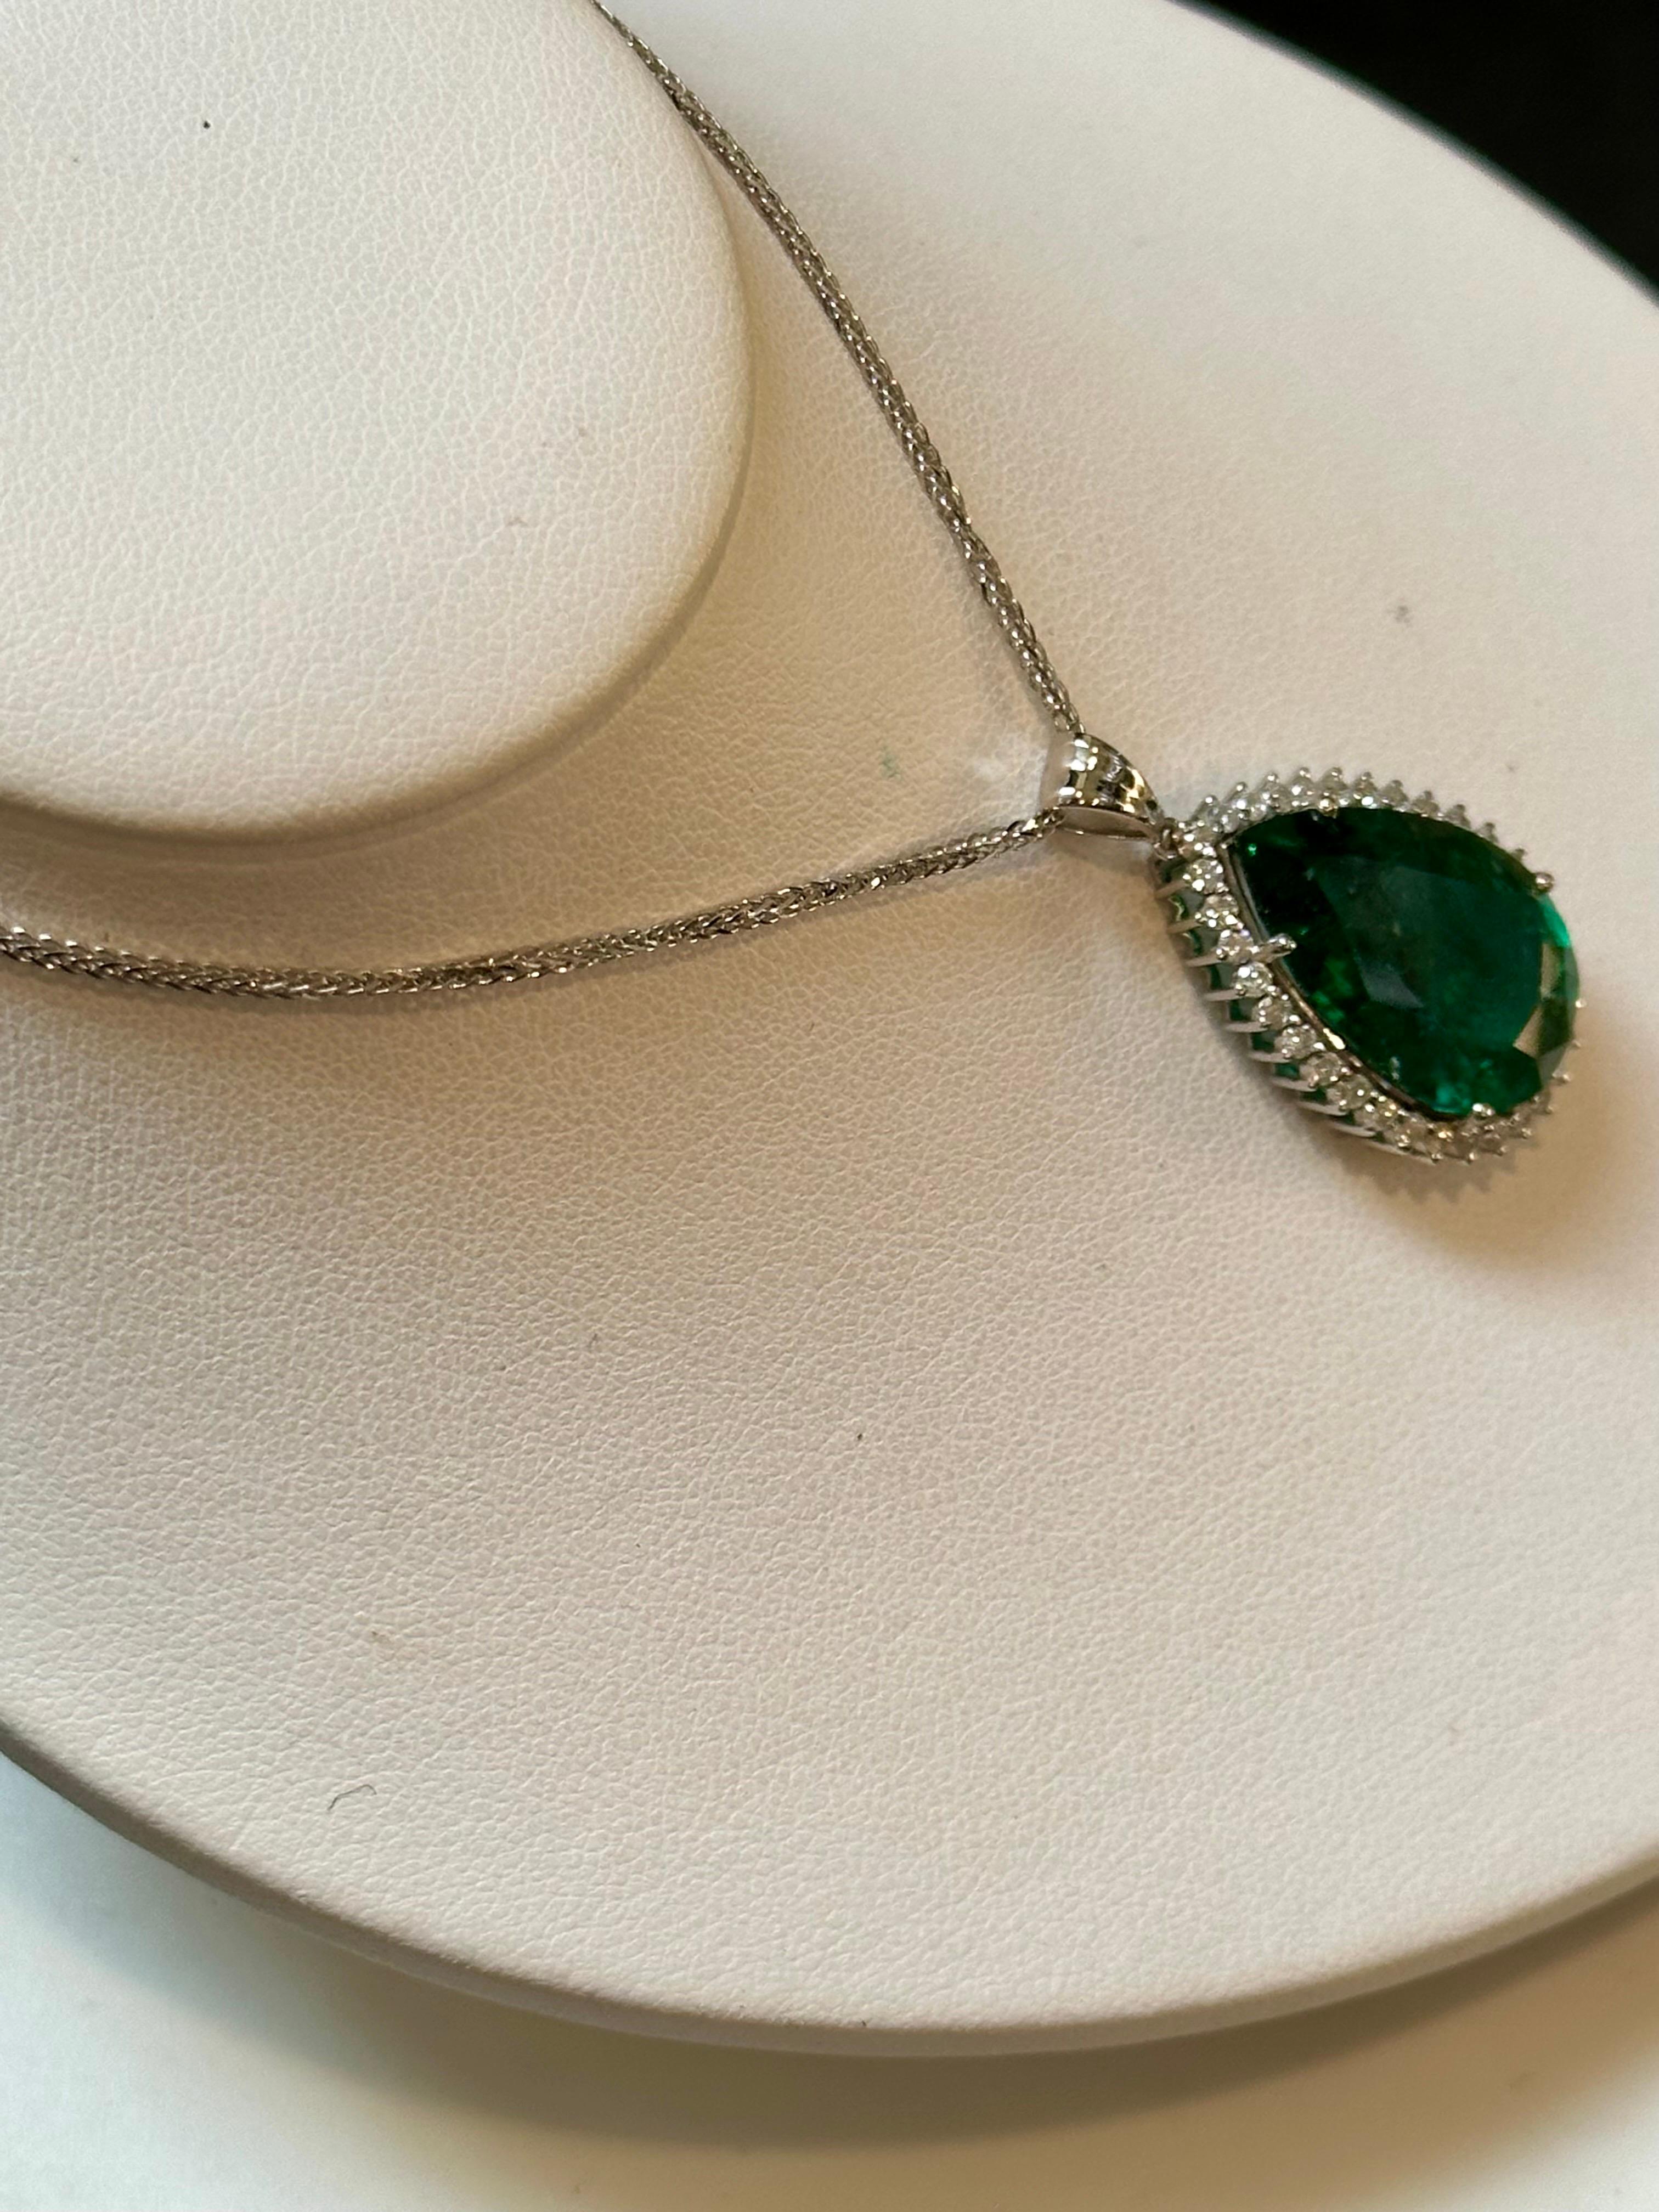 13 Ct Pear Cut Emerald & 1 Ct Diamond Halo Pendent/Necklace 14 KW Gold Chain 6